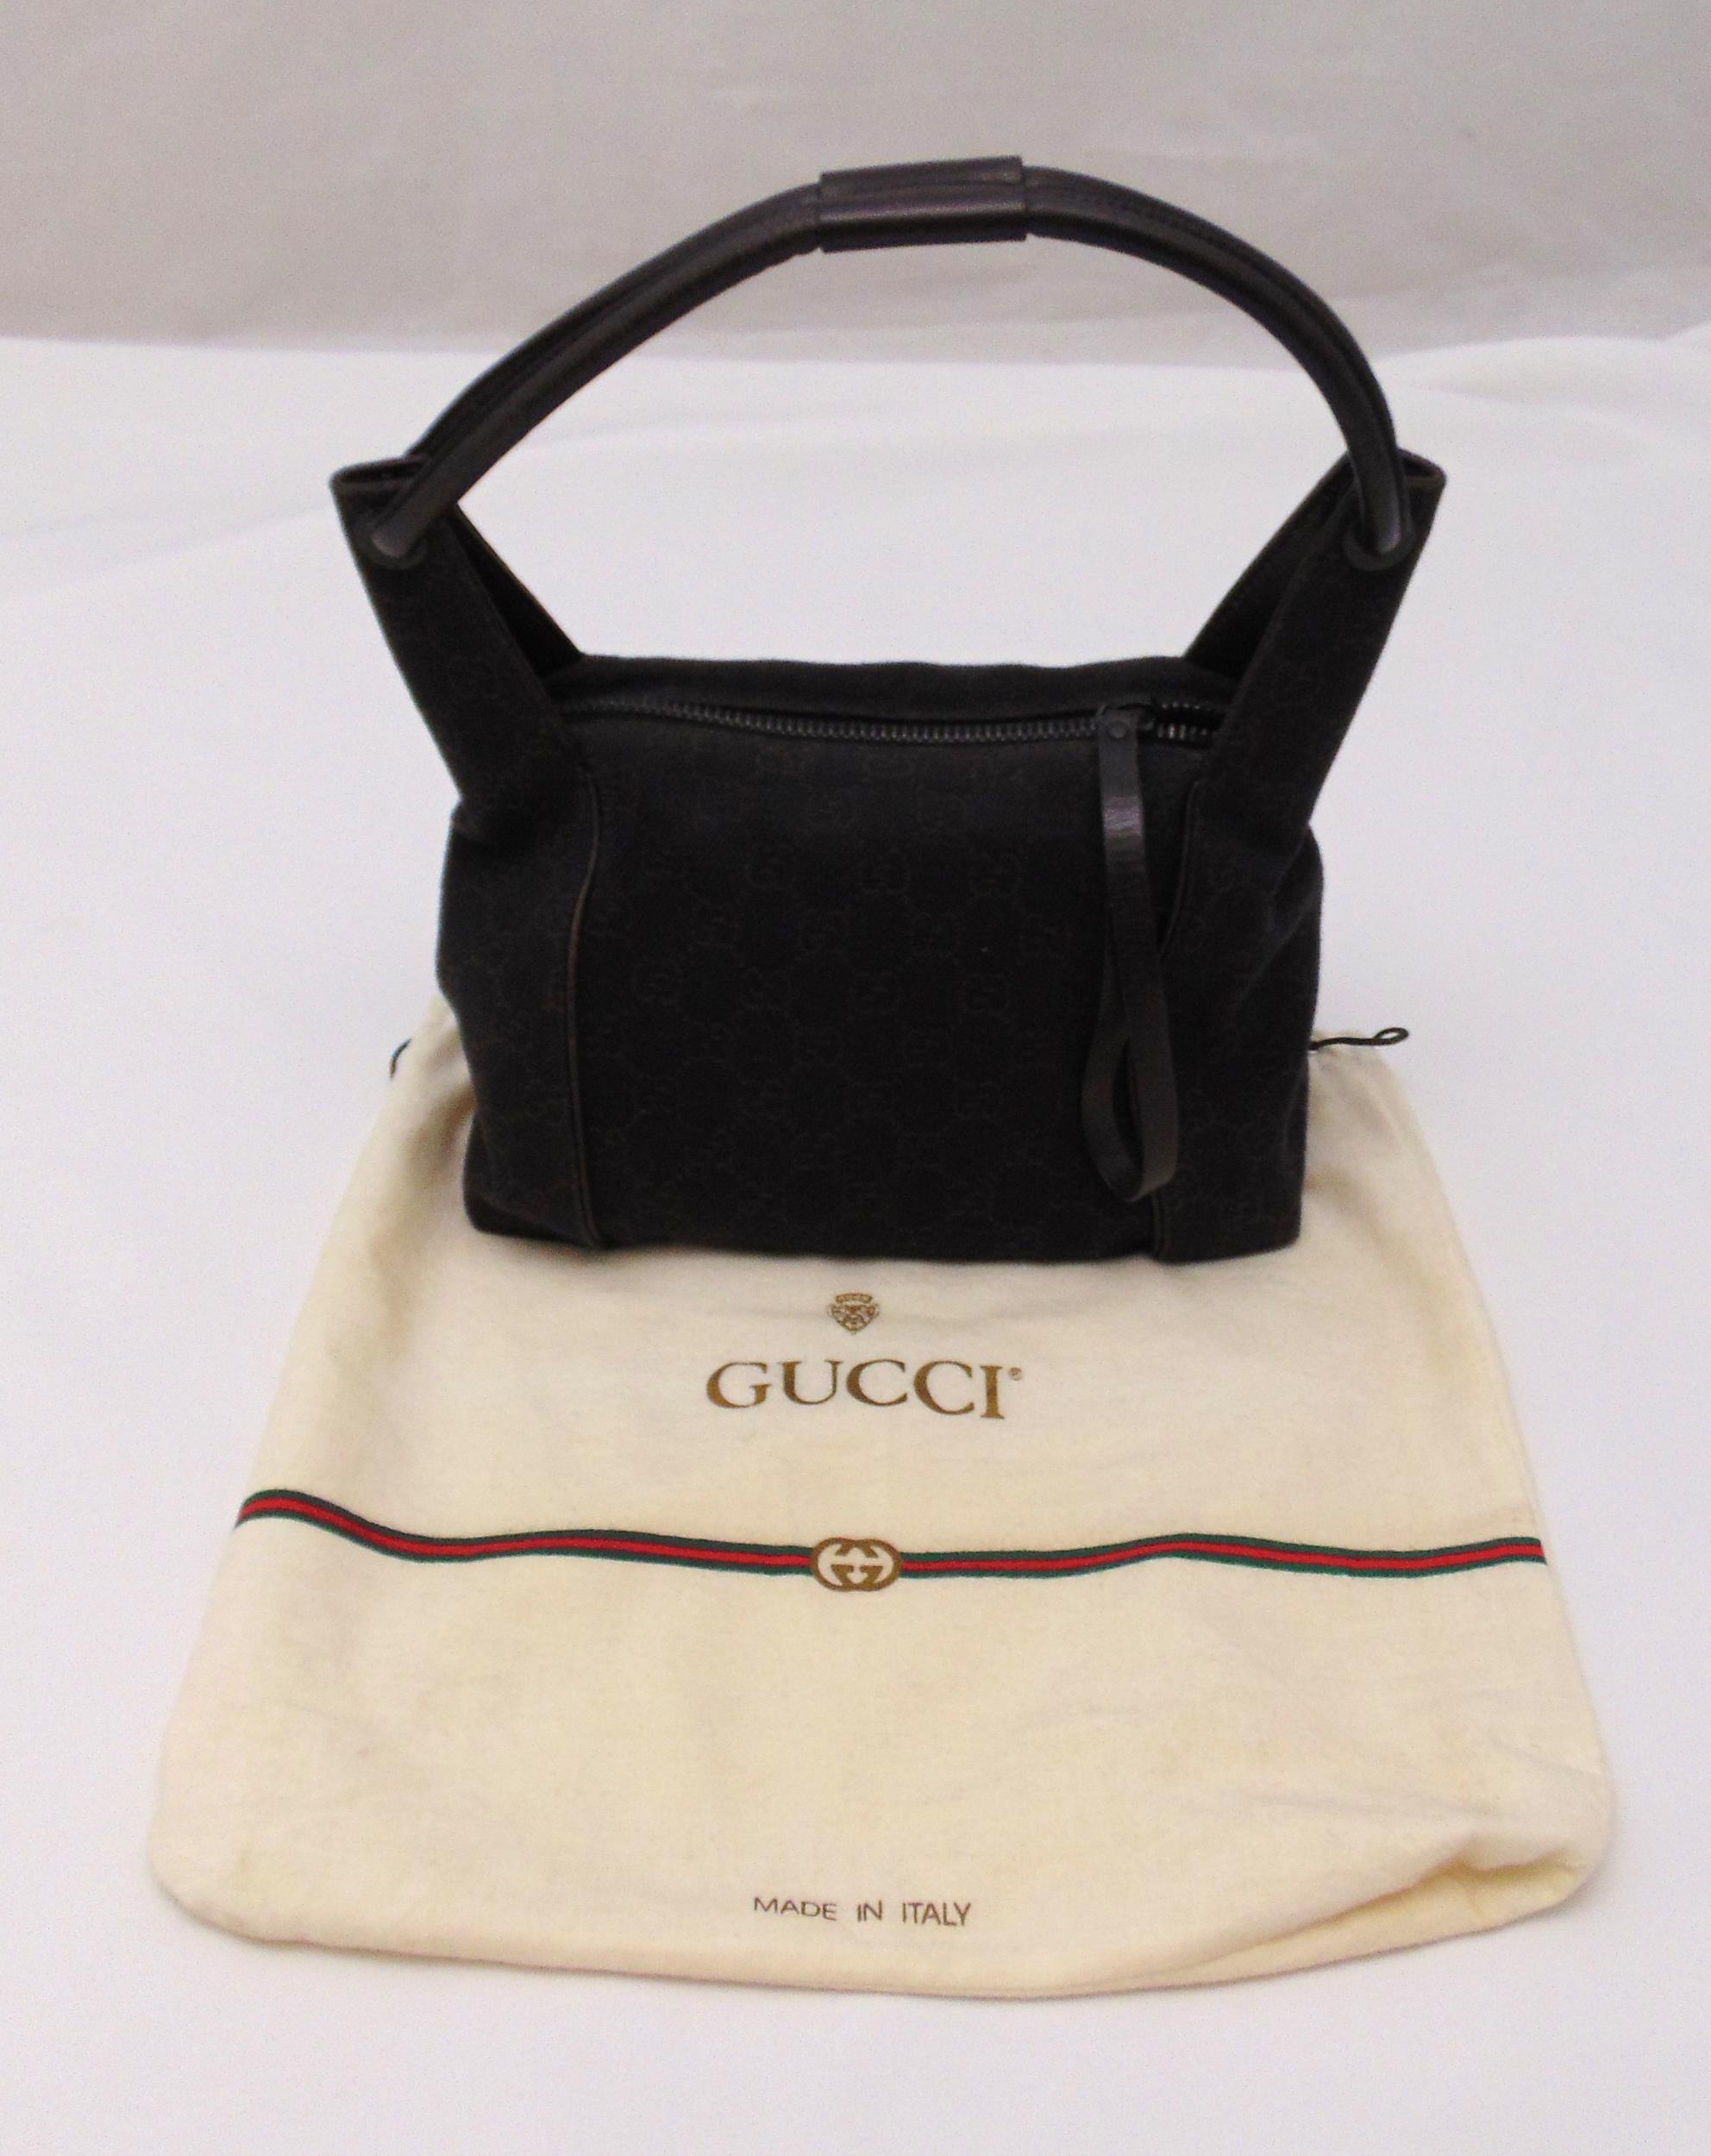 A vintage Gucci ladies fashion material handbag with leather strap handle and cloth cover